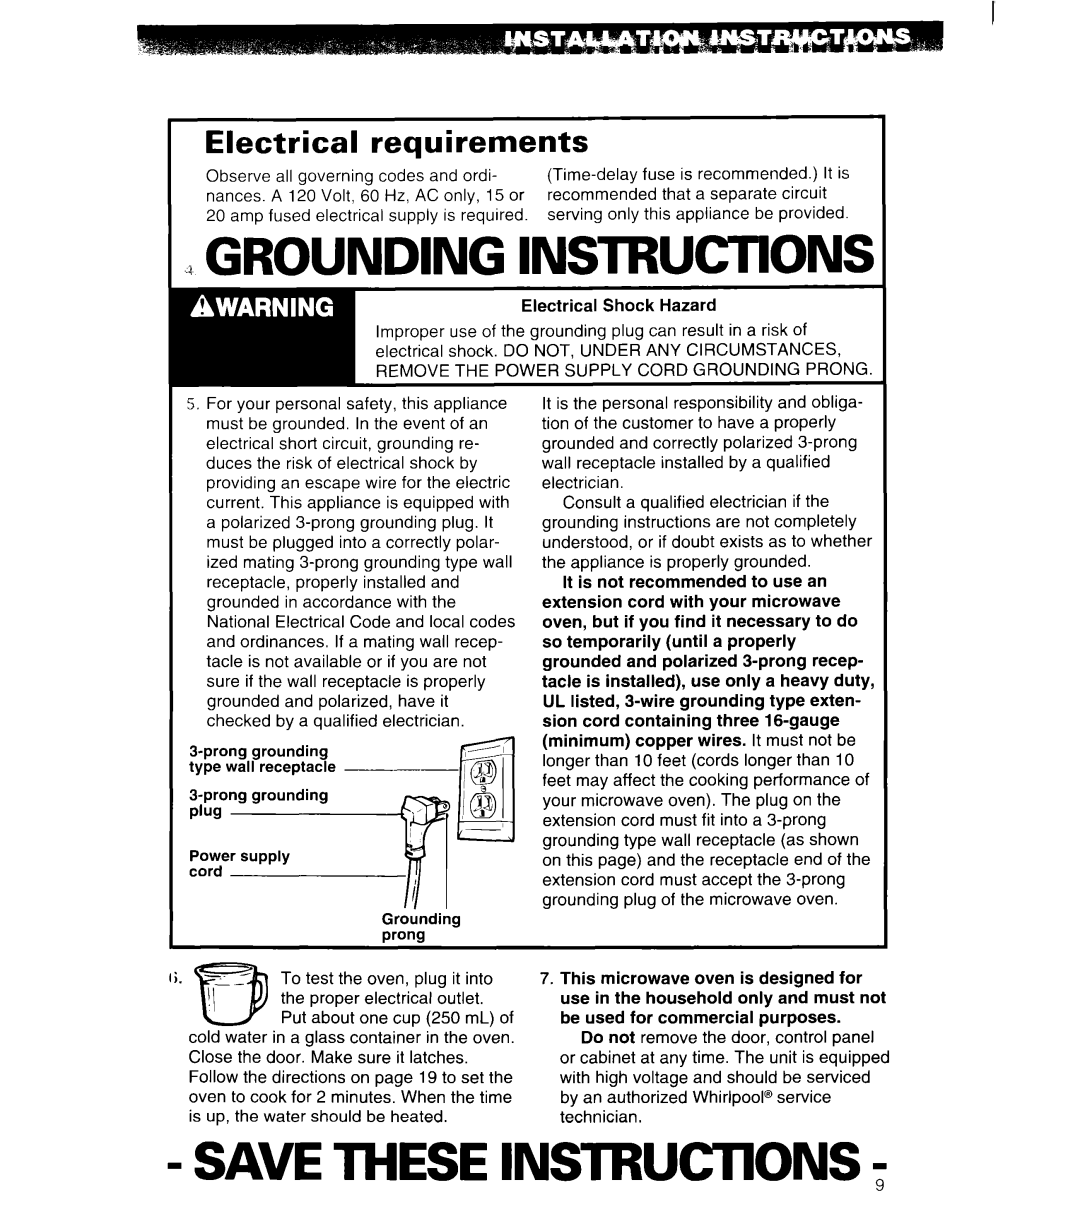 Whirlpool MT6125XBB/Q installation instructions aGROUNDING INSTRUCTIONS, SAVE THESE INSTRUCTlONS, Electrical requirements 